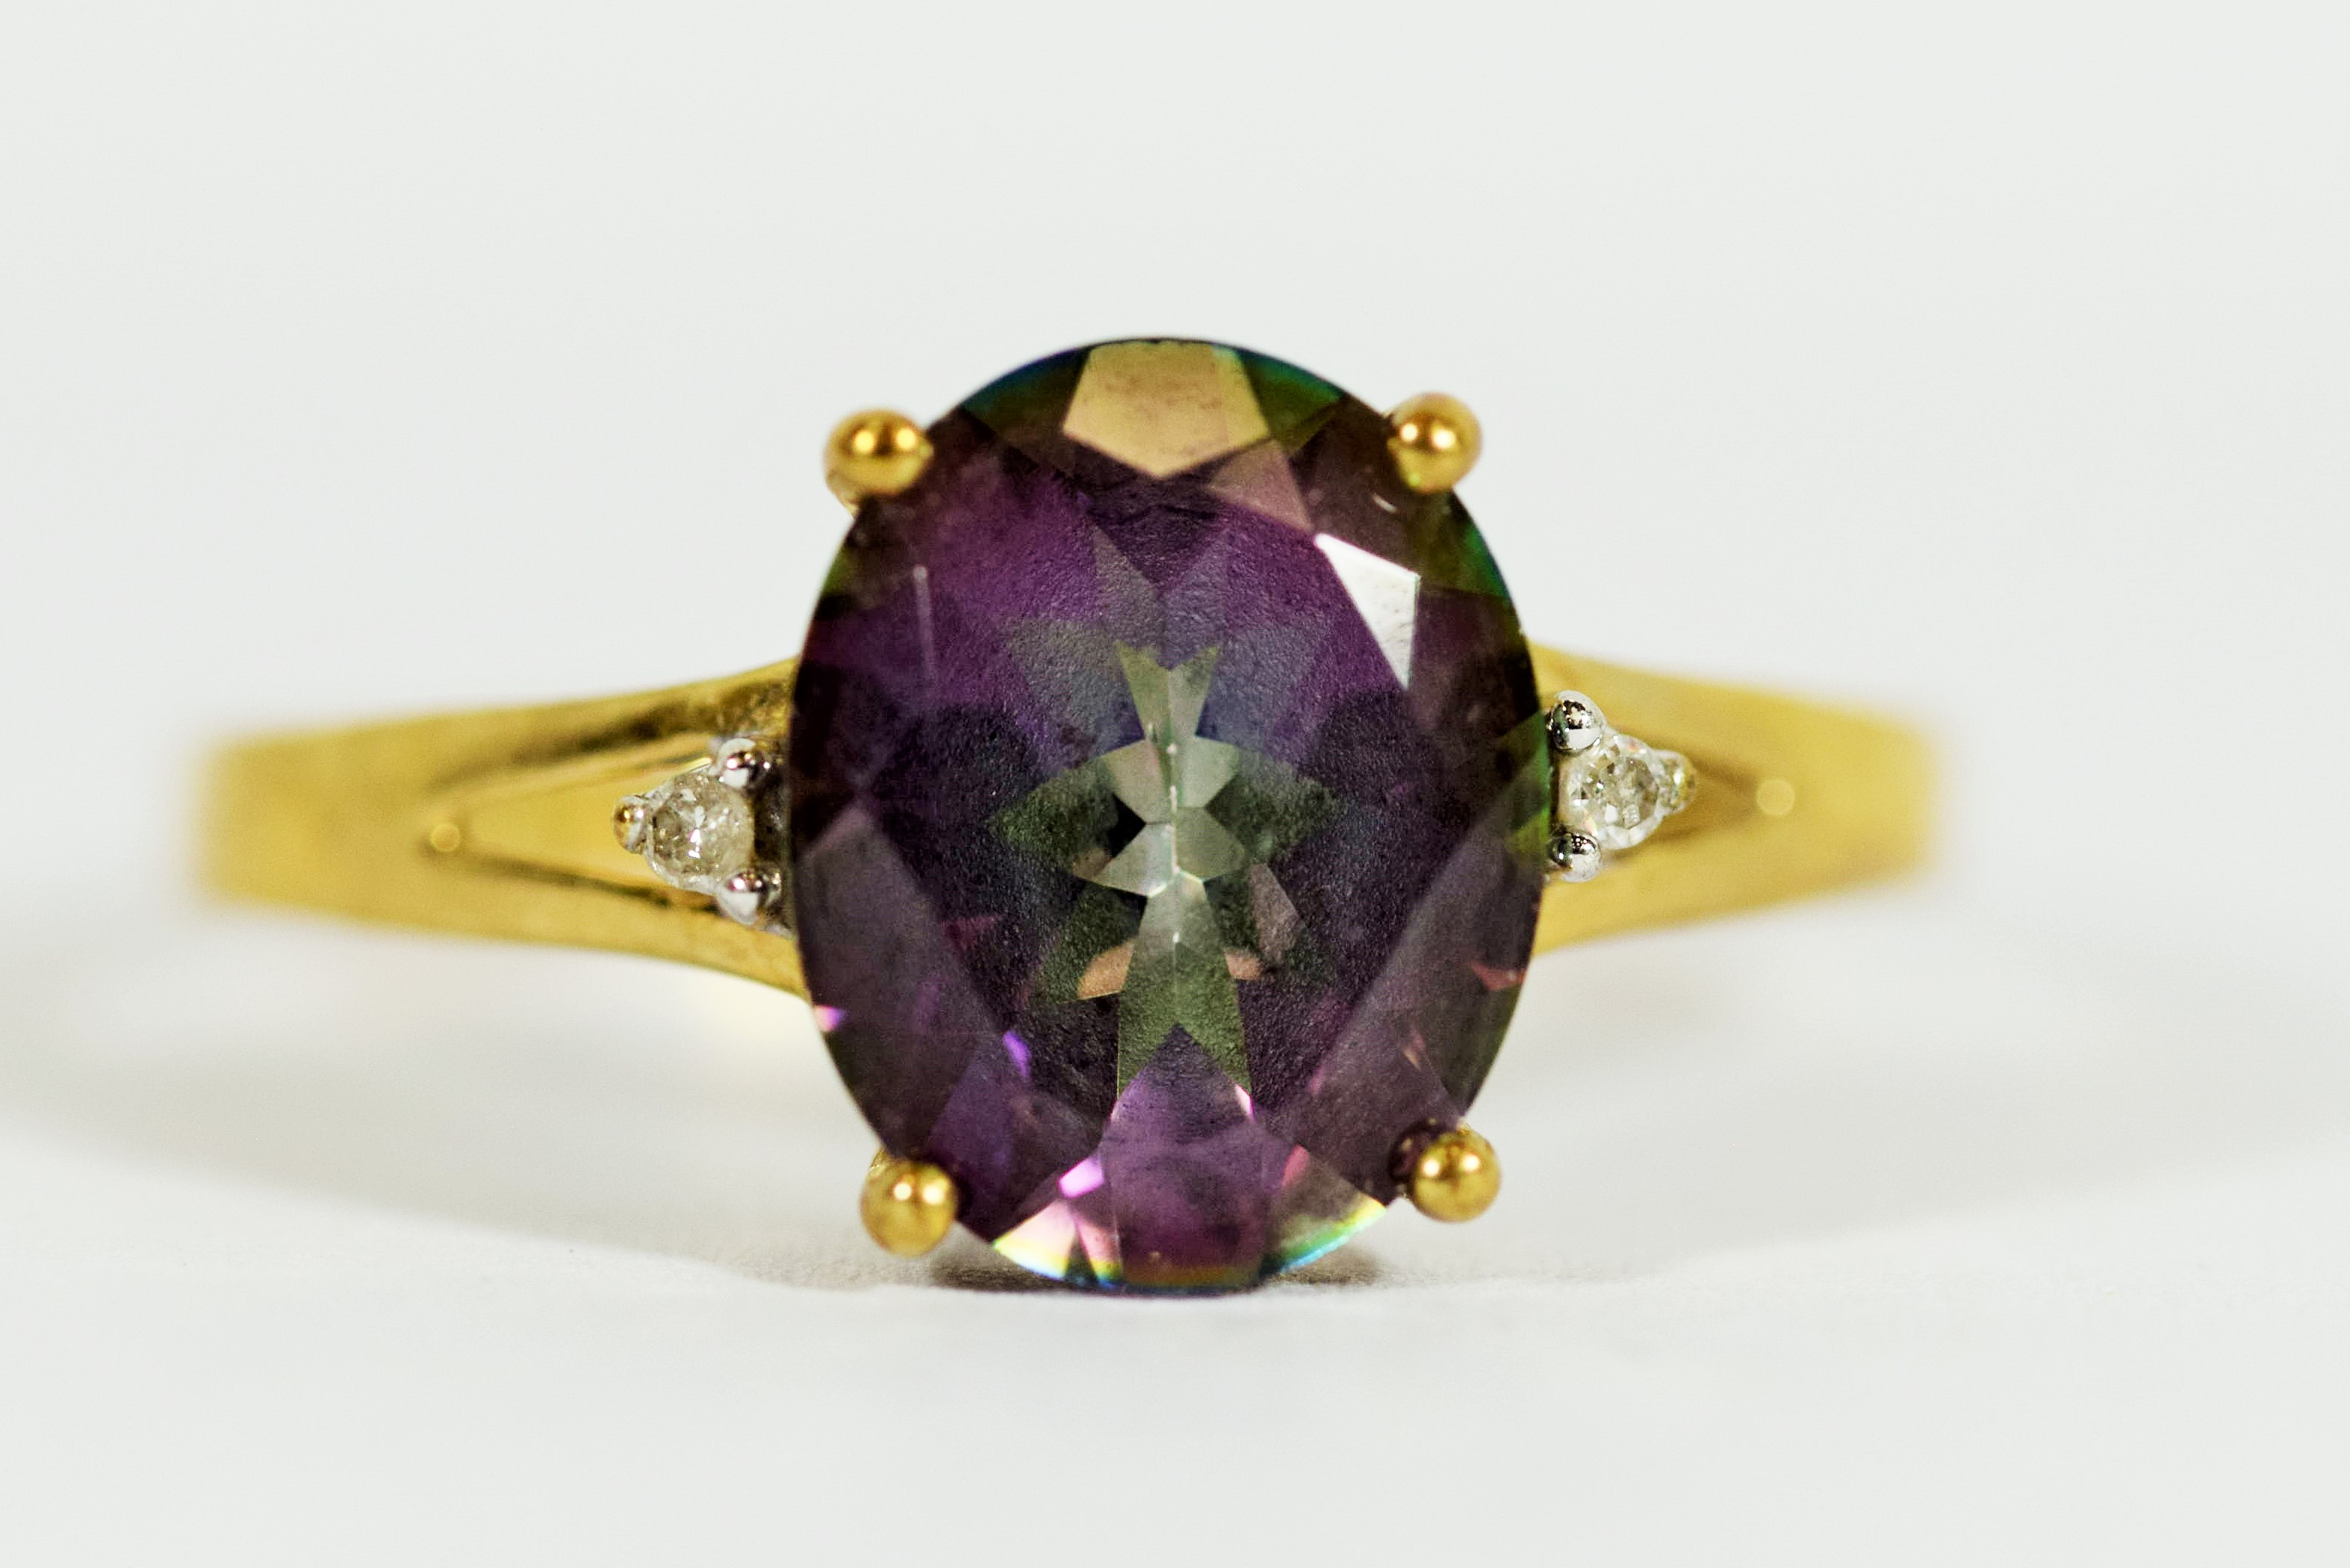 9ct Yellow Gold ring set with a Central Mystic Topaz which measures 11 x 8 mm, Accompanied by two Me